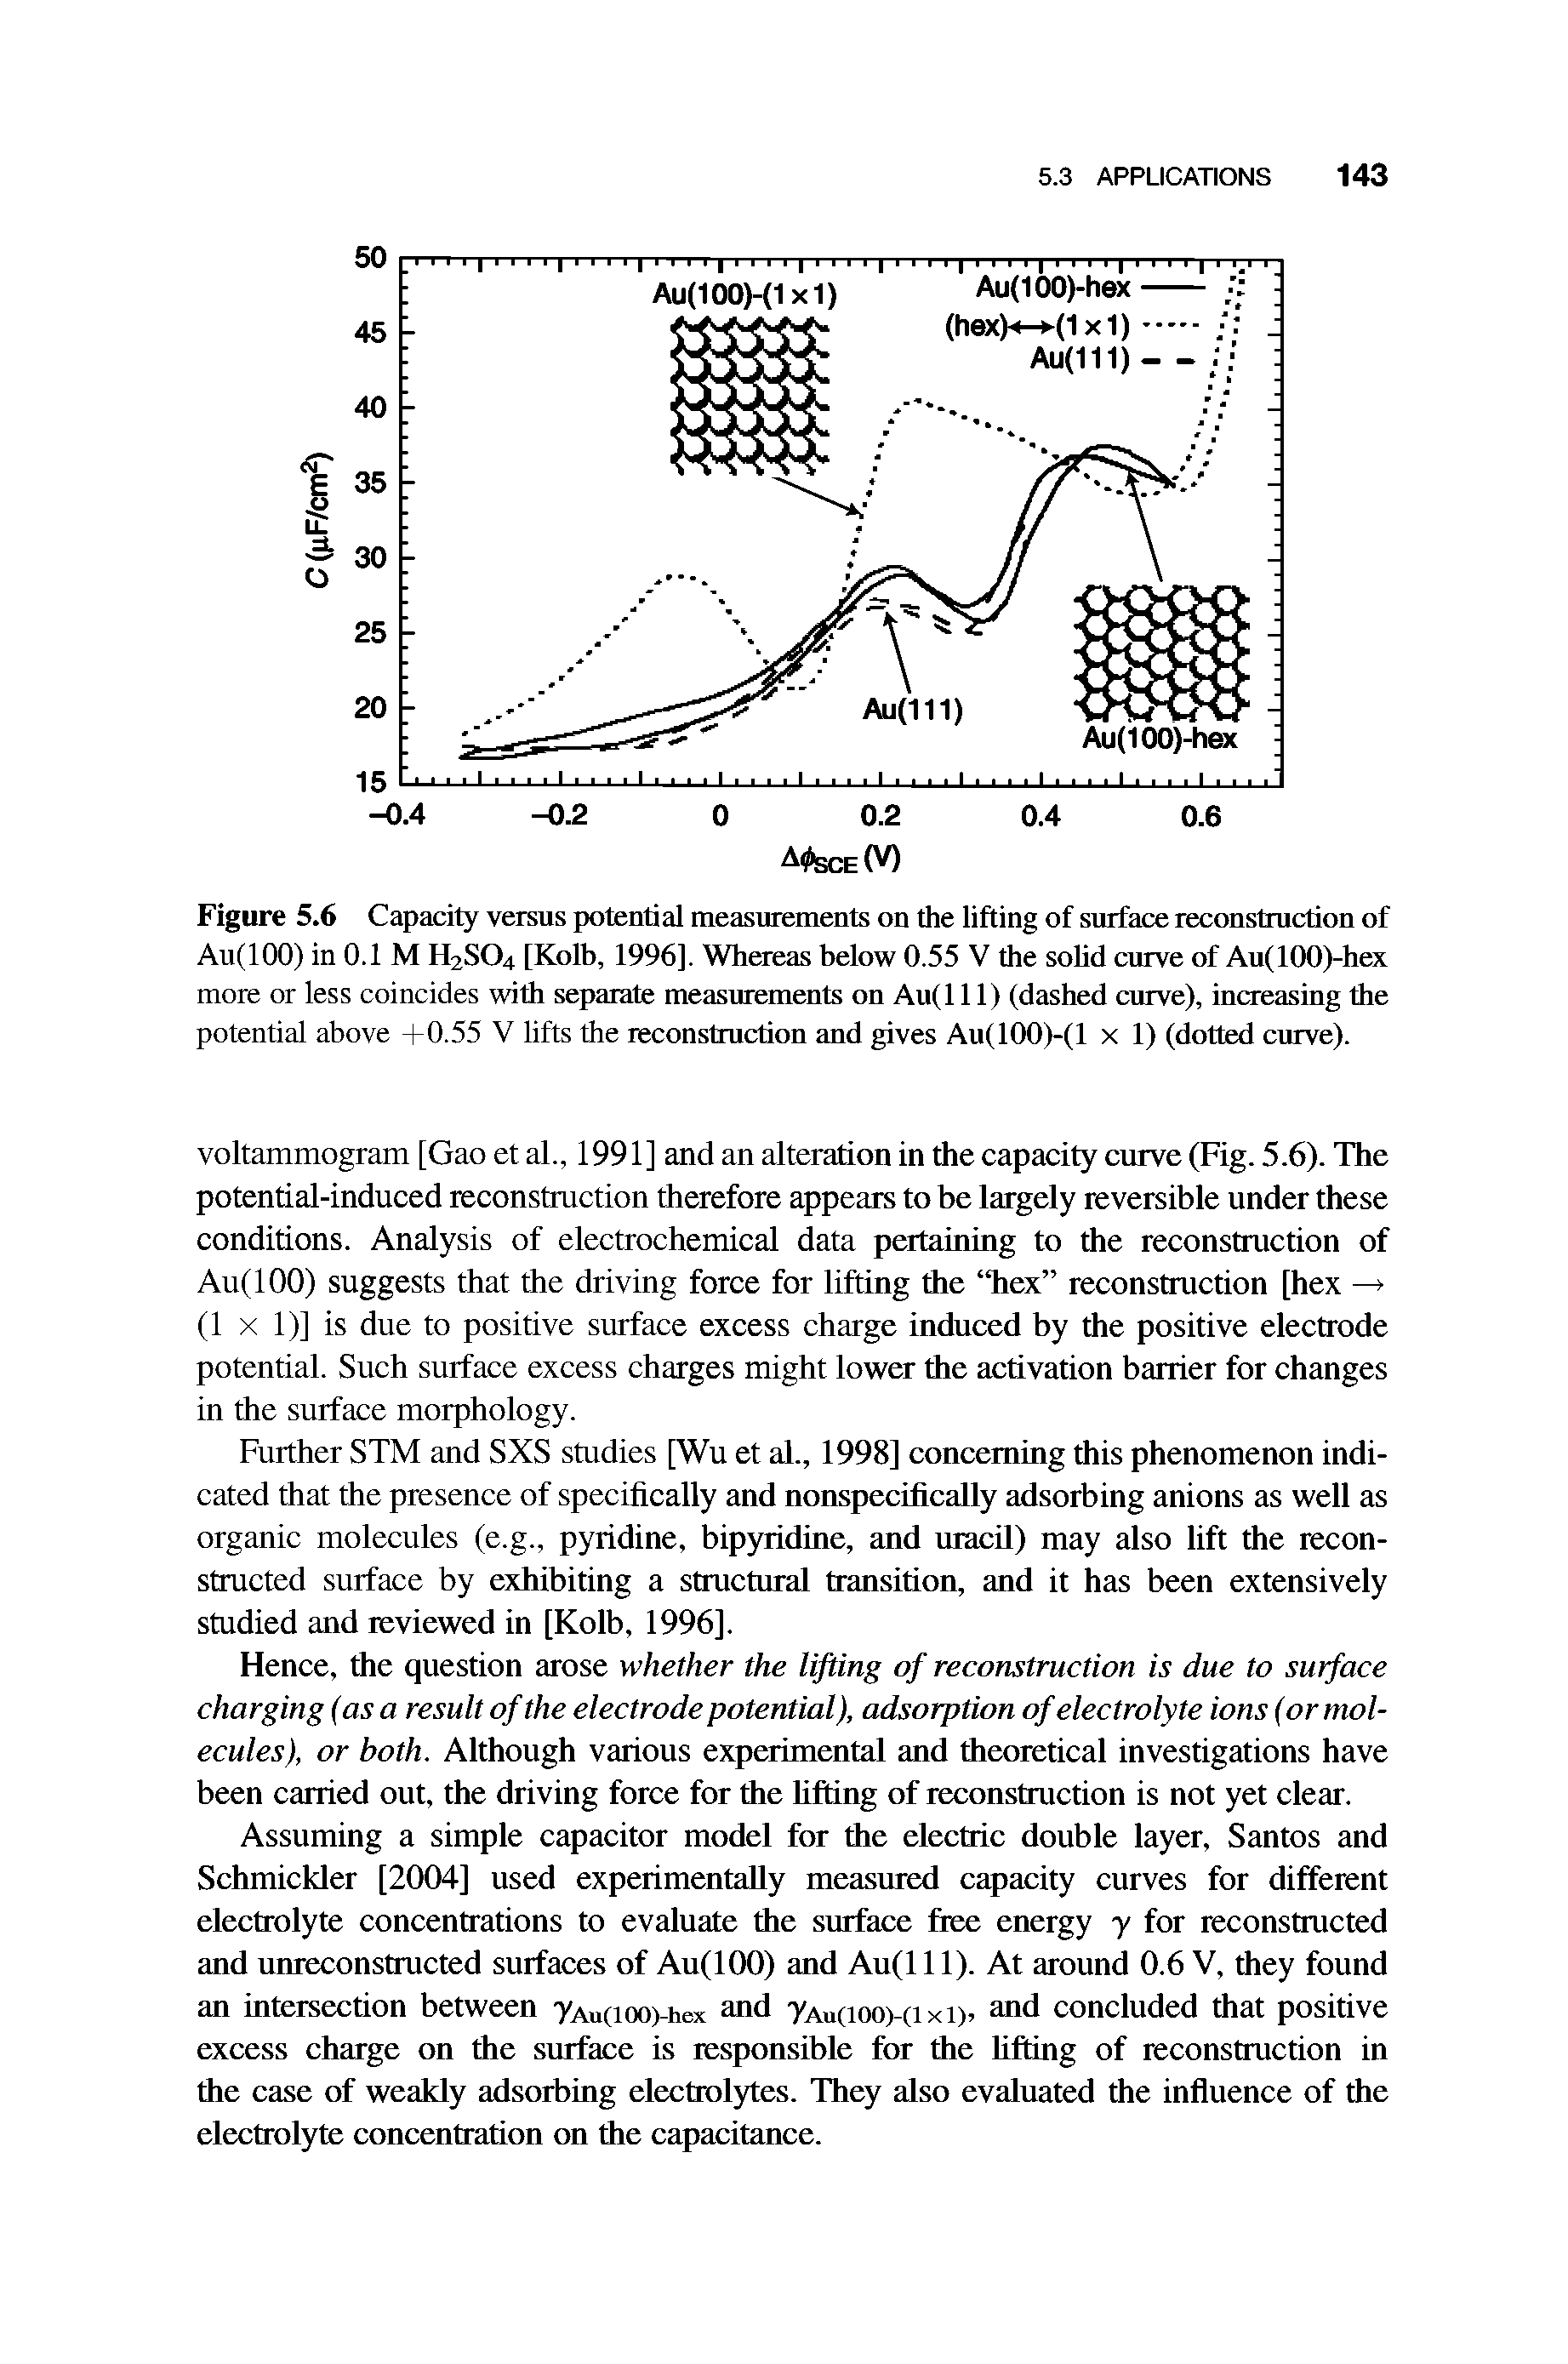 Figure 5.6 Capacity versus potential measurements on the lifting of surface reconstruction of Au(lOO) in 0.1 M H2SO4 [Kolb, 1996]. Whereas below 0.55 V the sohd curve of Au(100)-hex more or less coincides with separate measurements on Au(l 11) (dashed curve), increasing the potential above +0.55 V lifts the reconstruction and gives Au(100)-(1 x 1) (dotted curve).